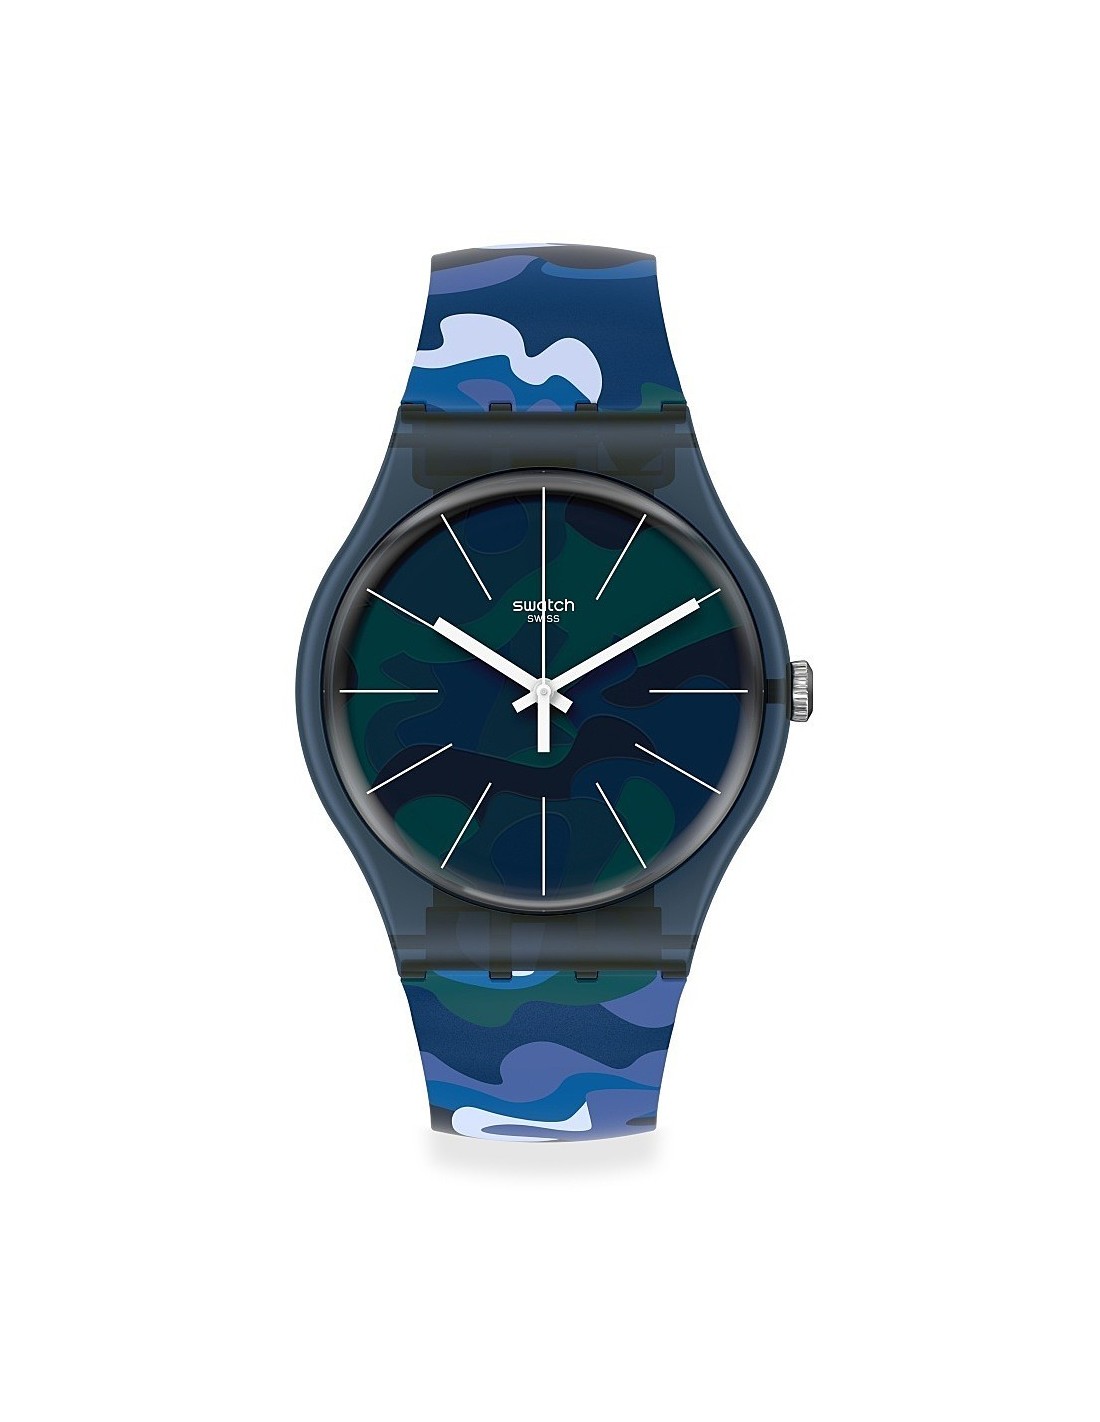 MONTRE SWATCH CAMOUCLOUDS SUON140